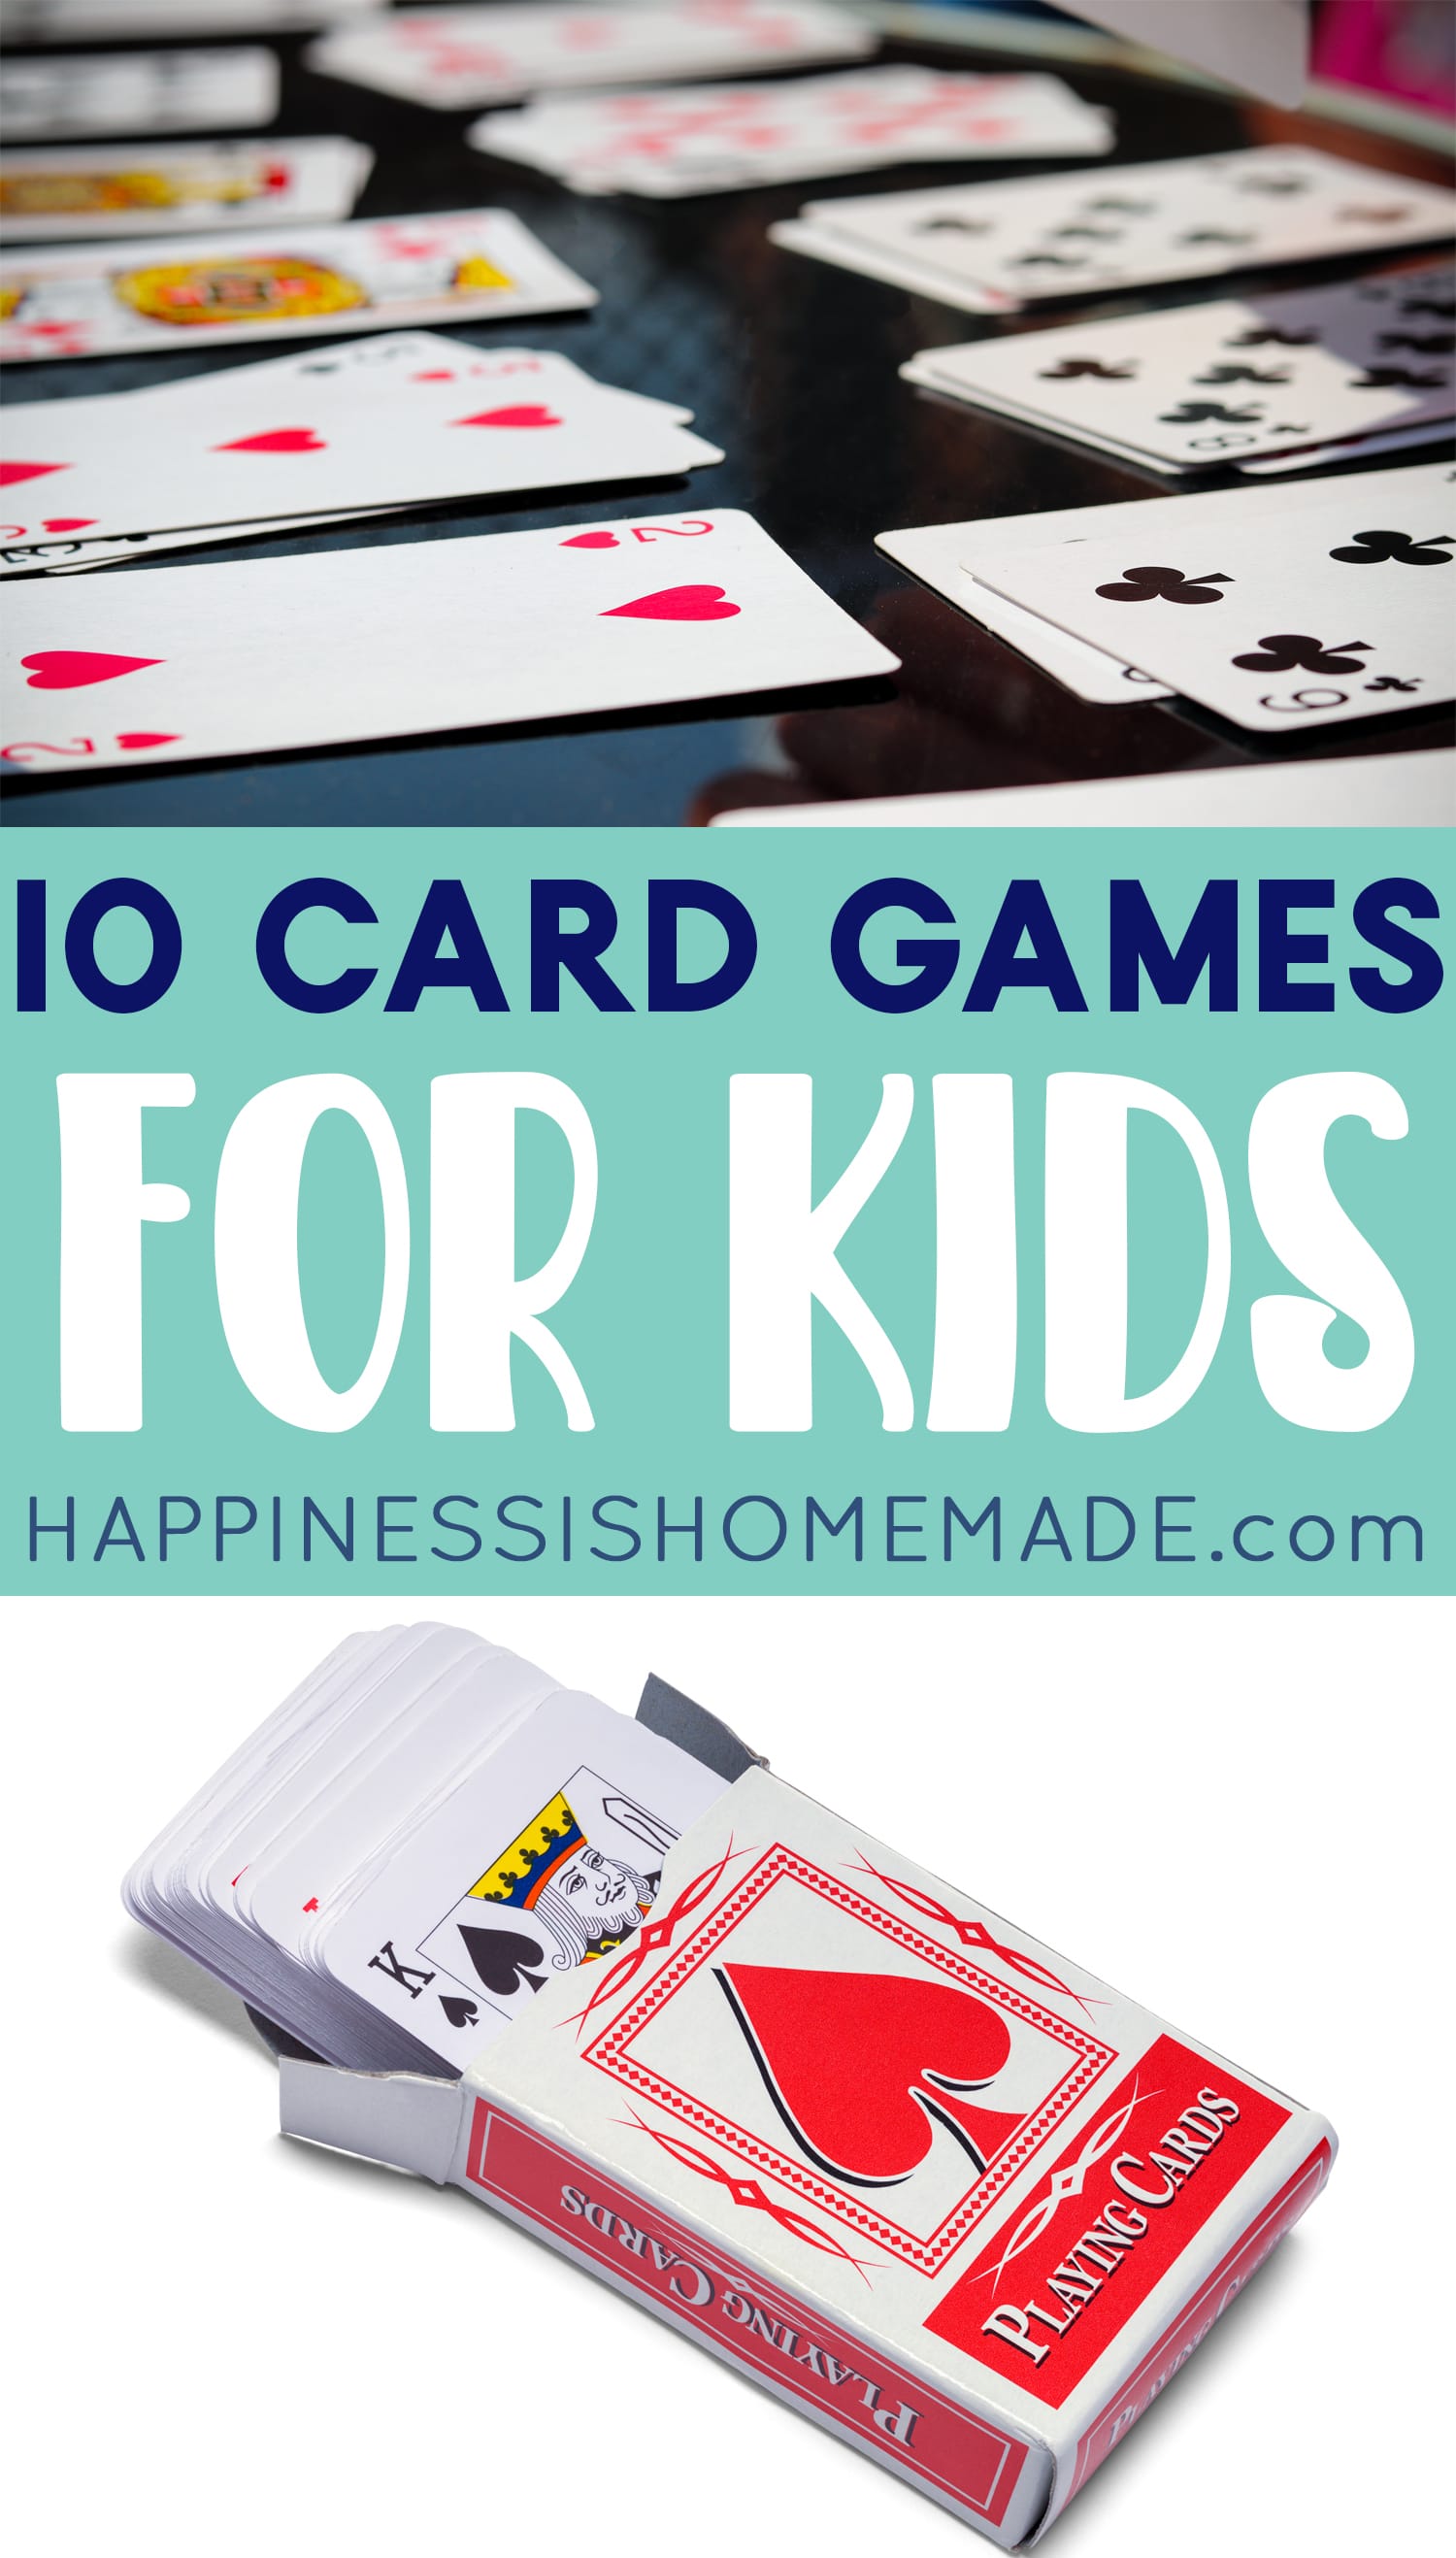 10 card games for kids